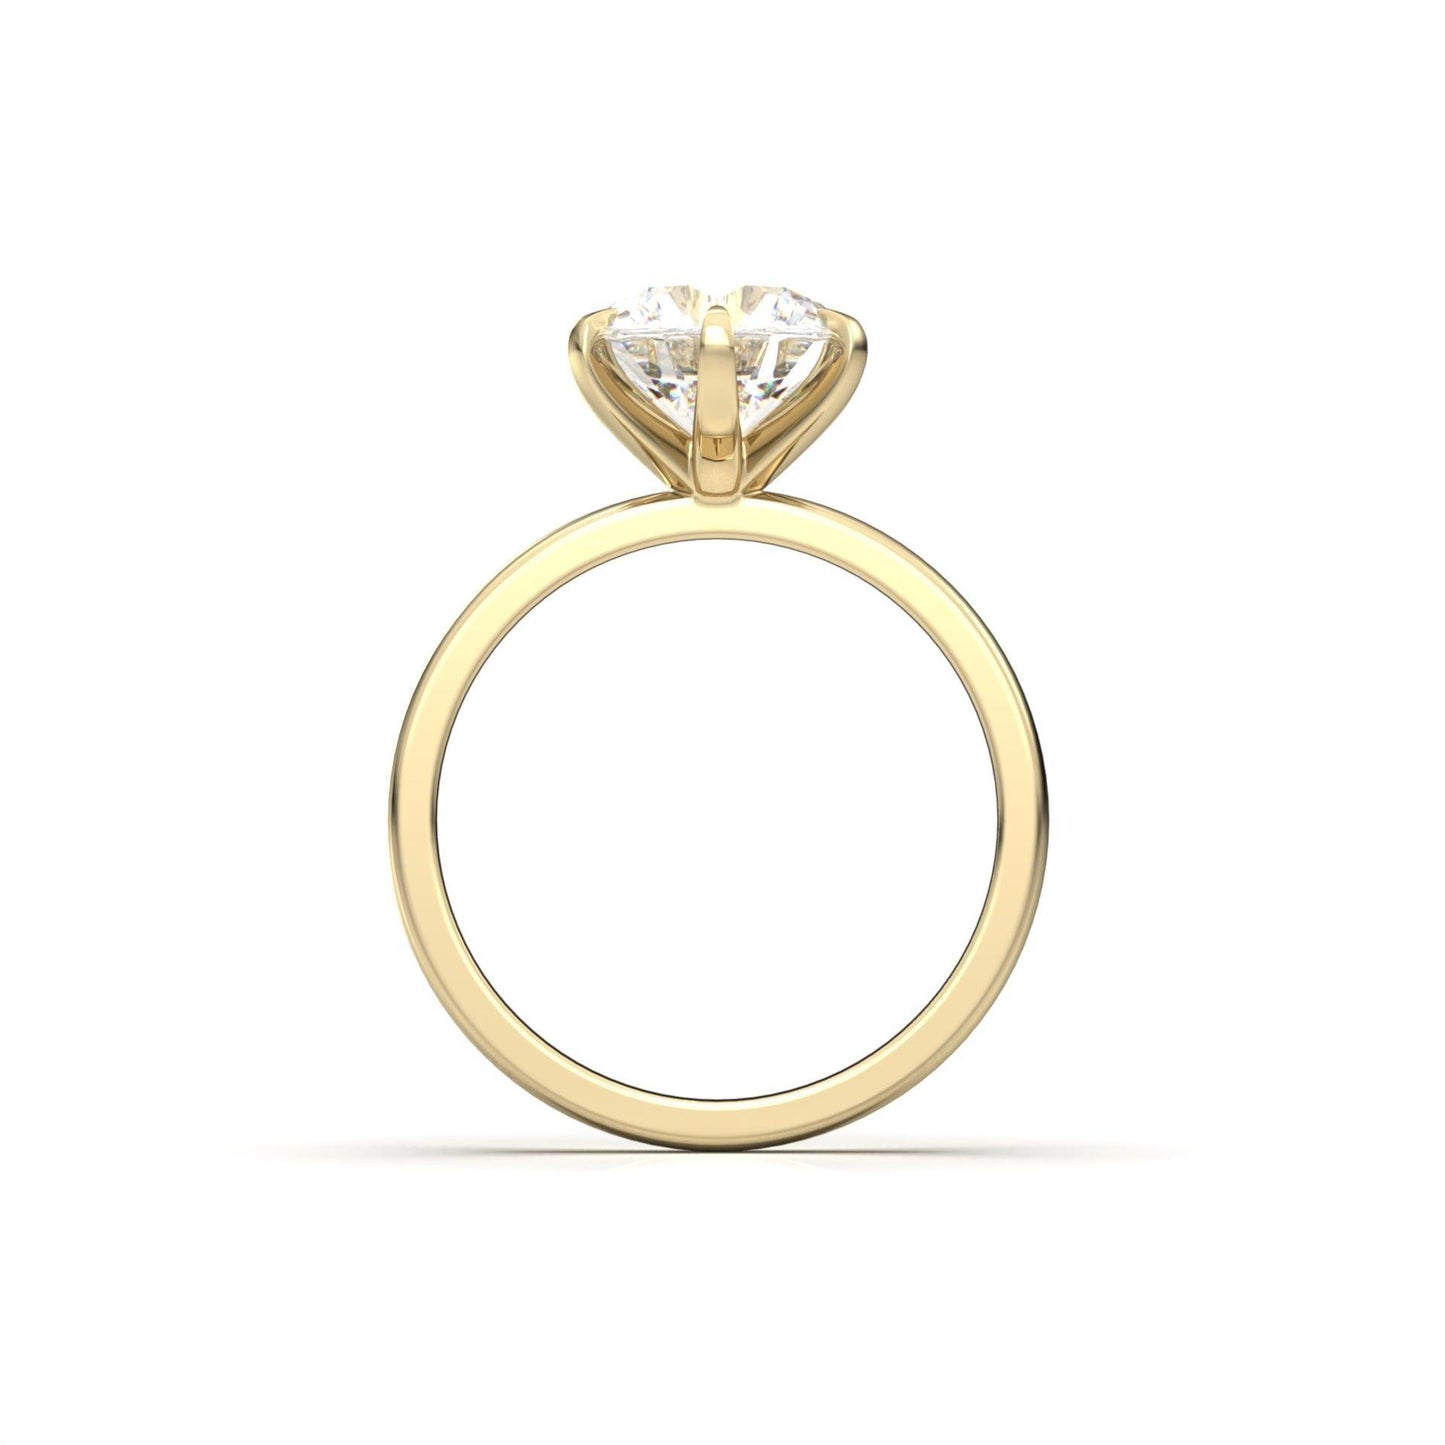 Round Solitaire 6 Claw Setting - moissaniteengagementrings